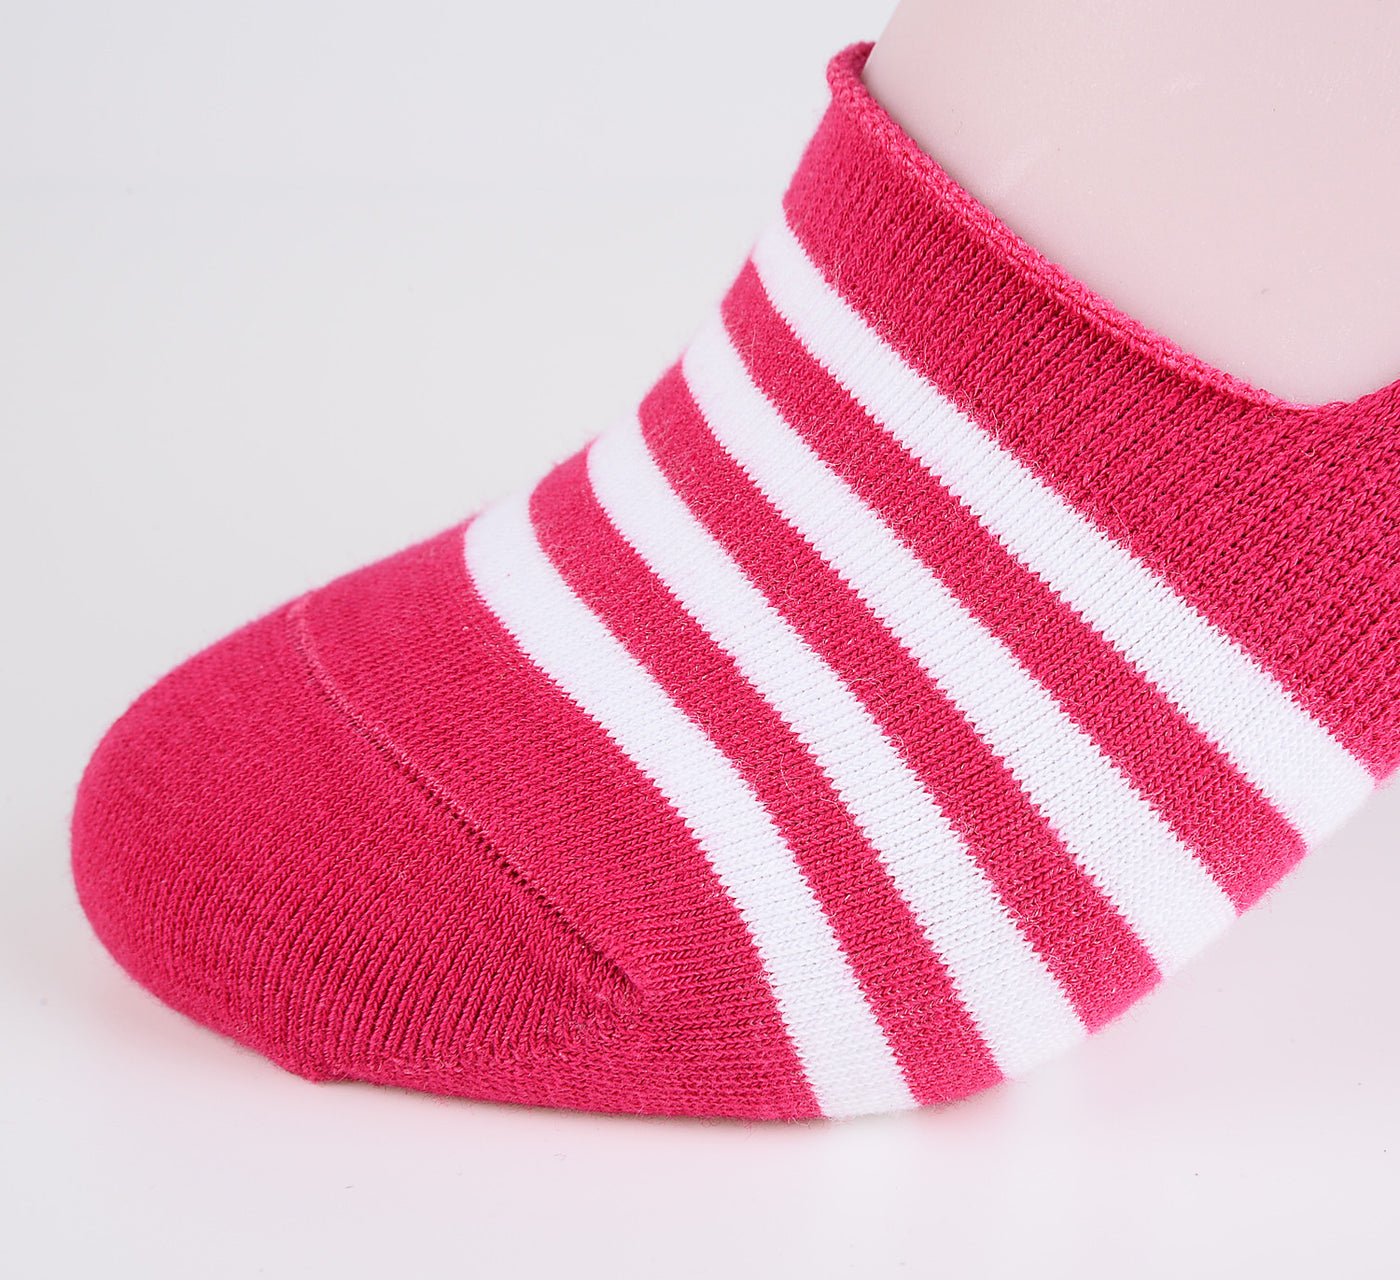 2 Pairs Finest Combed Cotton Invisible Socks Striped Cerise